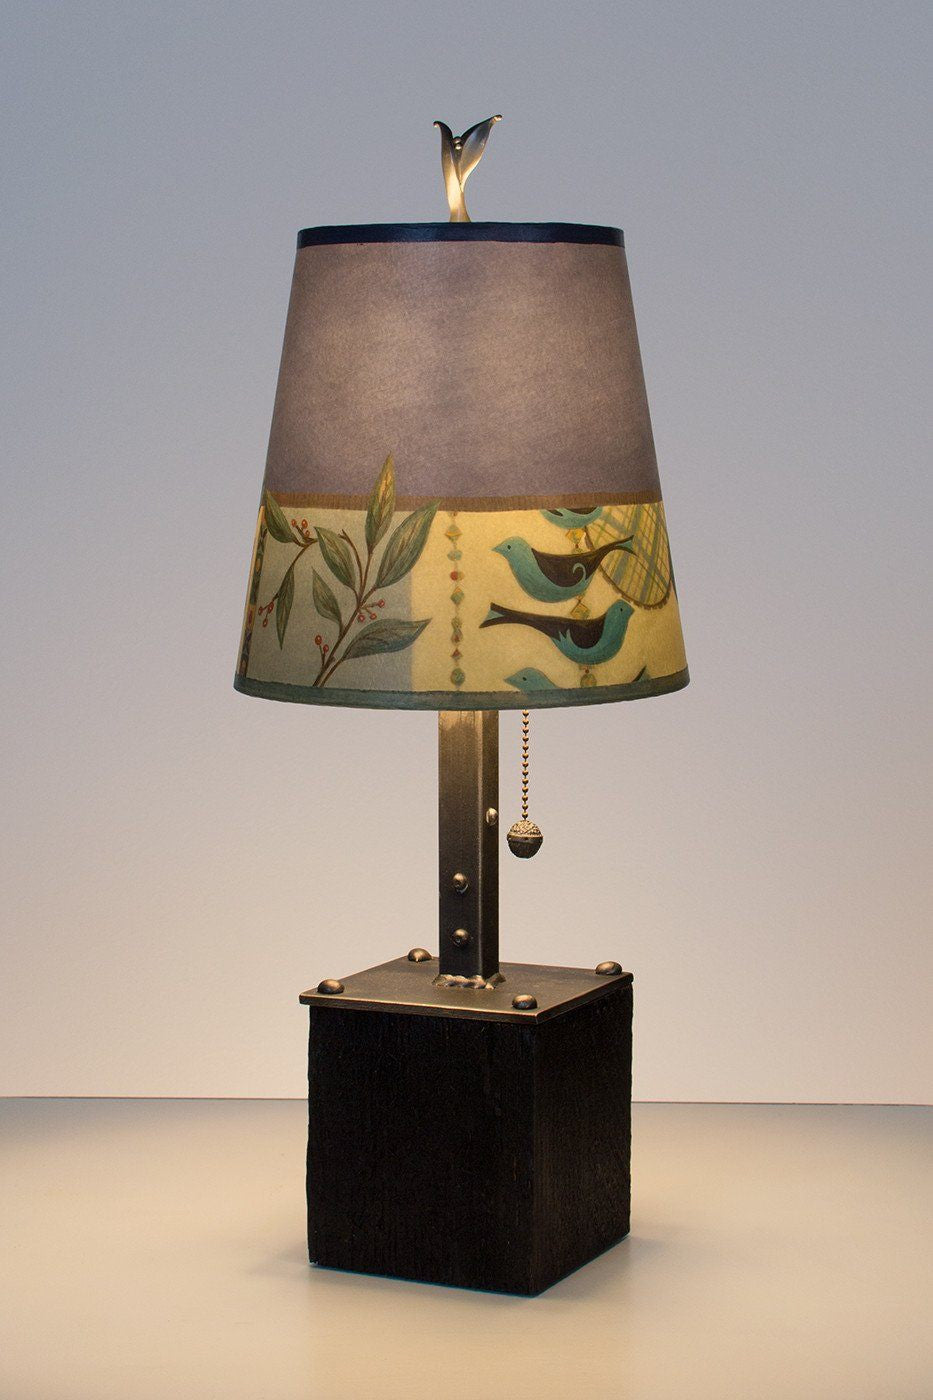 Steel Table Lamp on Reclaimed Wood with Small Drum Shade in New Capri Periwinkle Lit